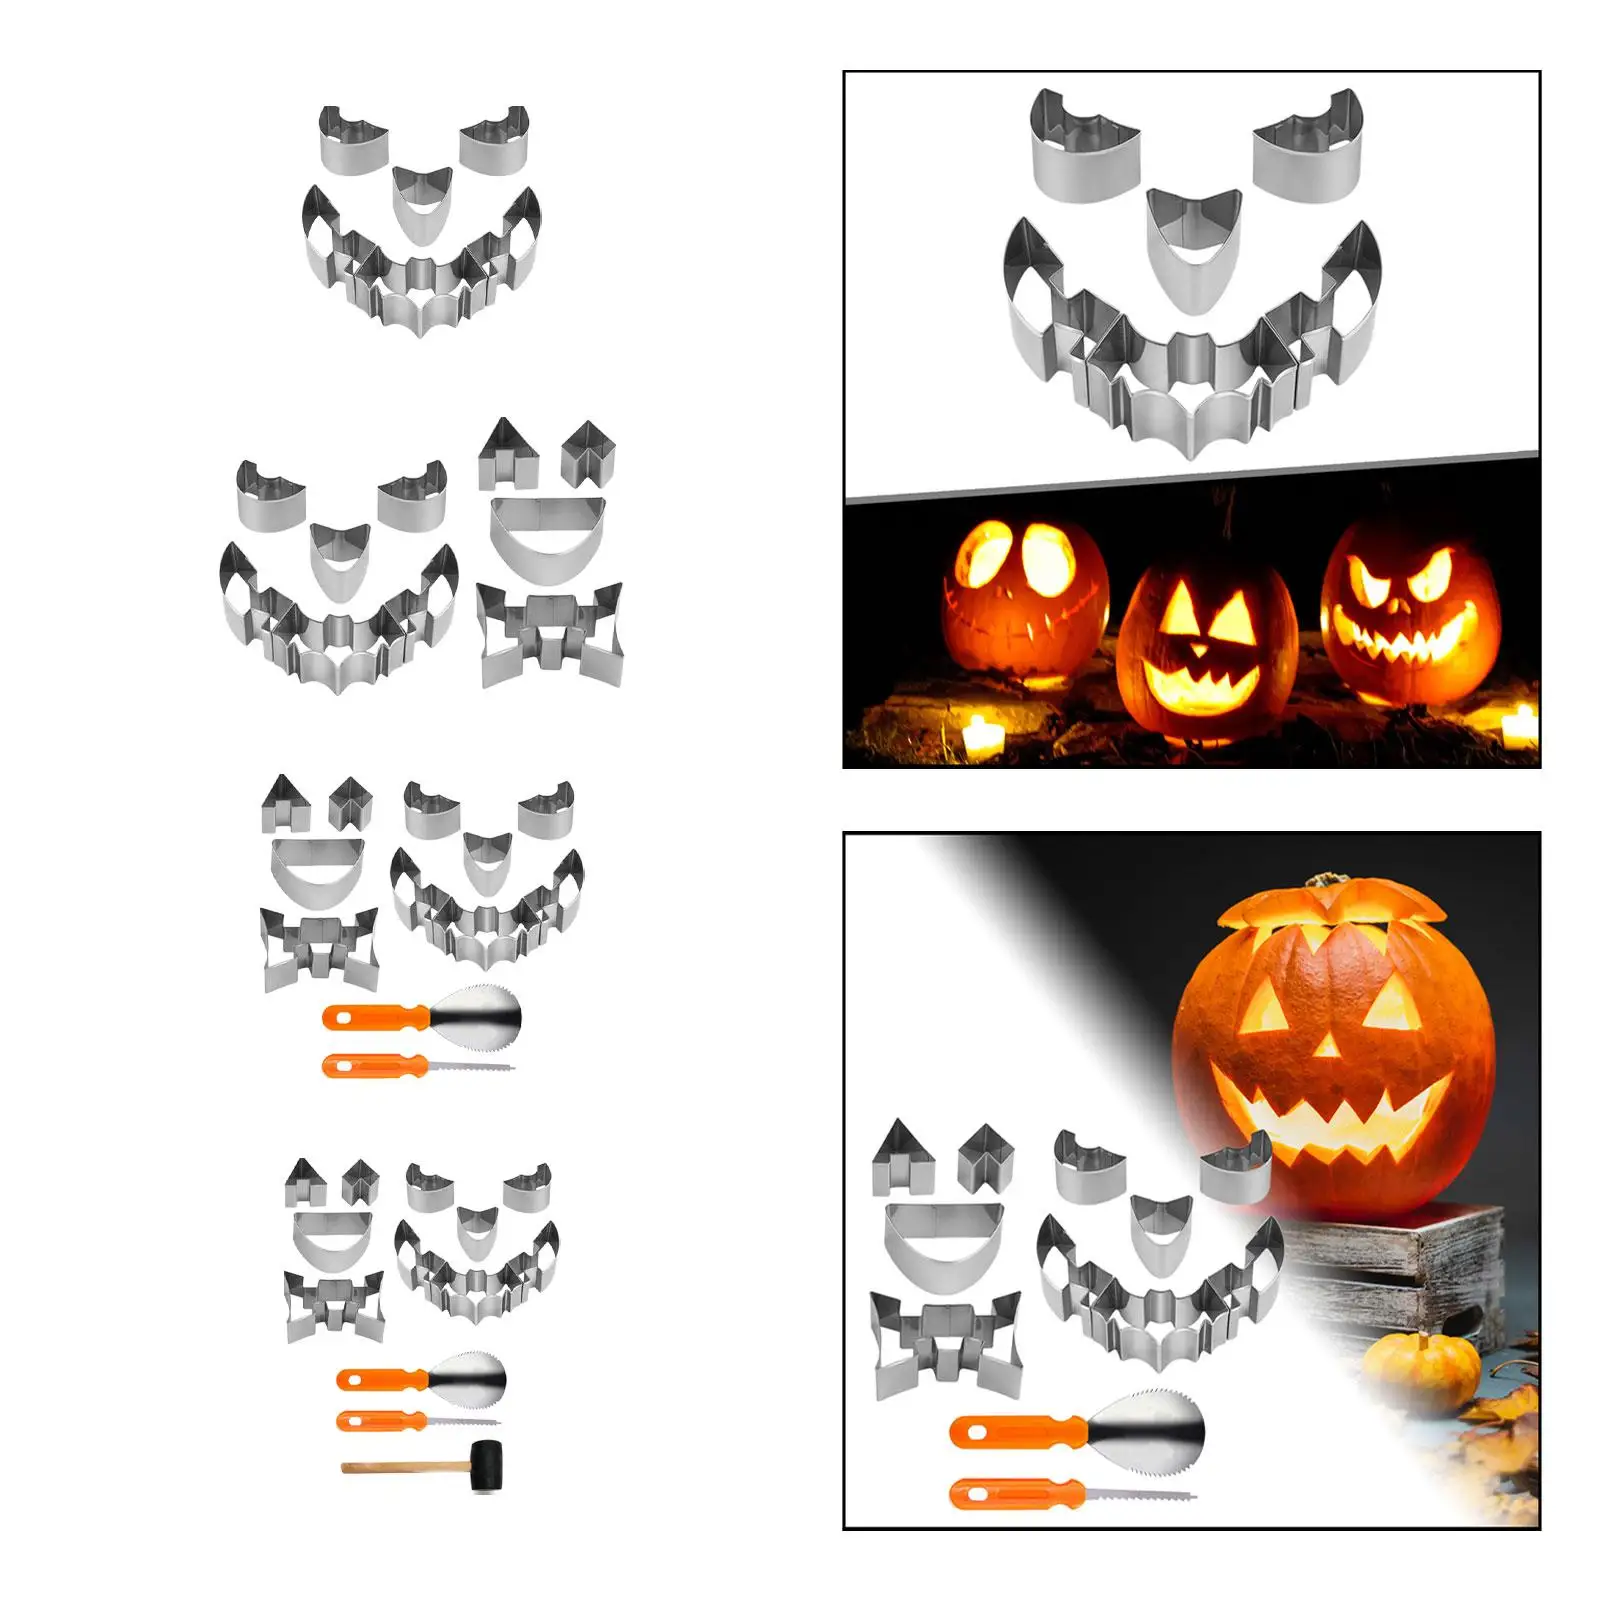 Halloween Pumpkin Carving Tools Precision Kitchen Gadgets Pumpkin Carving Stencils Pumpkin Carver for Halloween Party Decoration